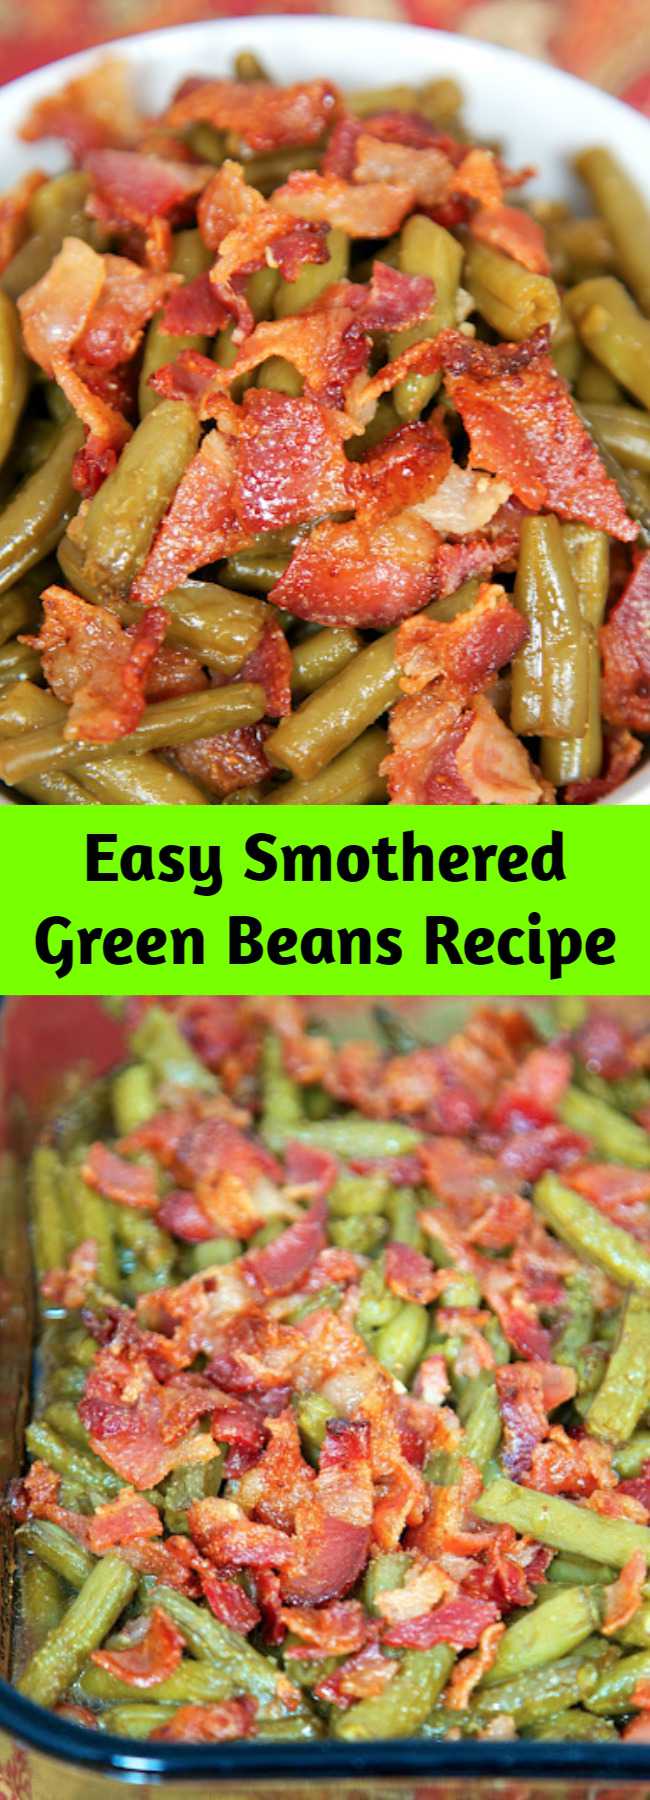 Easy Smothered Green Beans Recipe - Canned green beans baked in bacon, brown sugar, butter, soy sauce, and garlic. This is the most requested green bean recipe in our house. Everybody gets seconds. SO good!! Great for a potluck. Everyone asks for the recipe! Super easy to make.